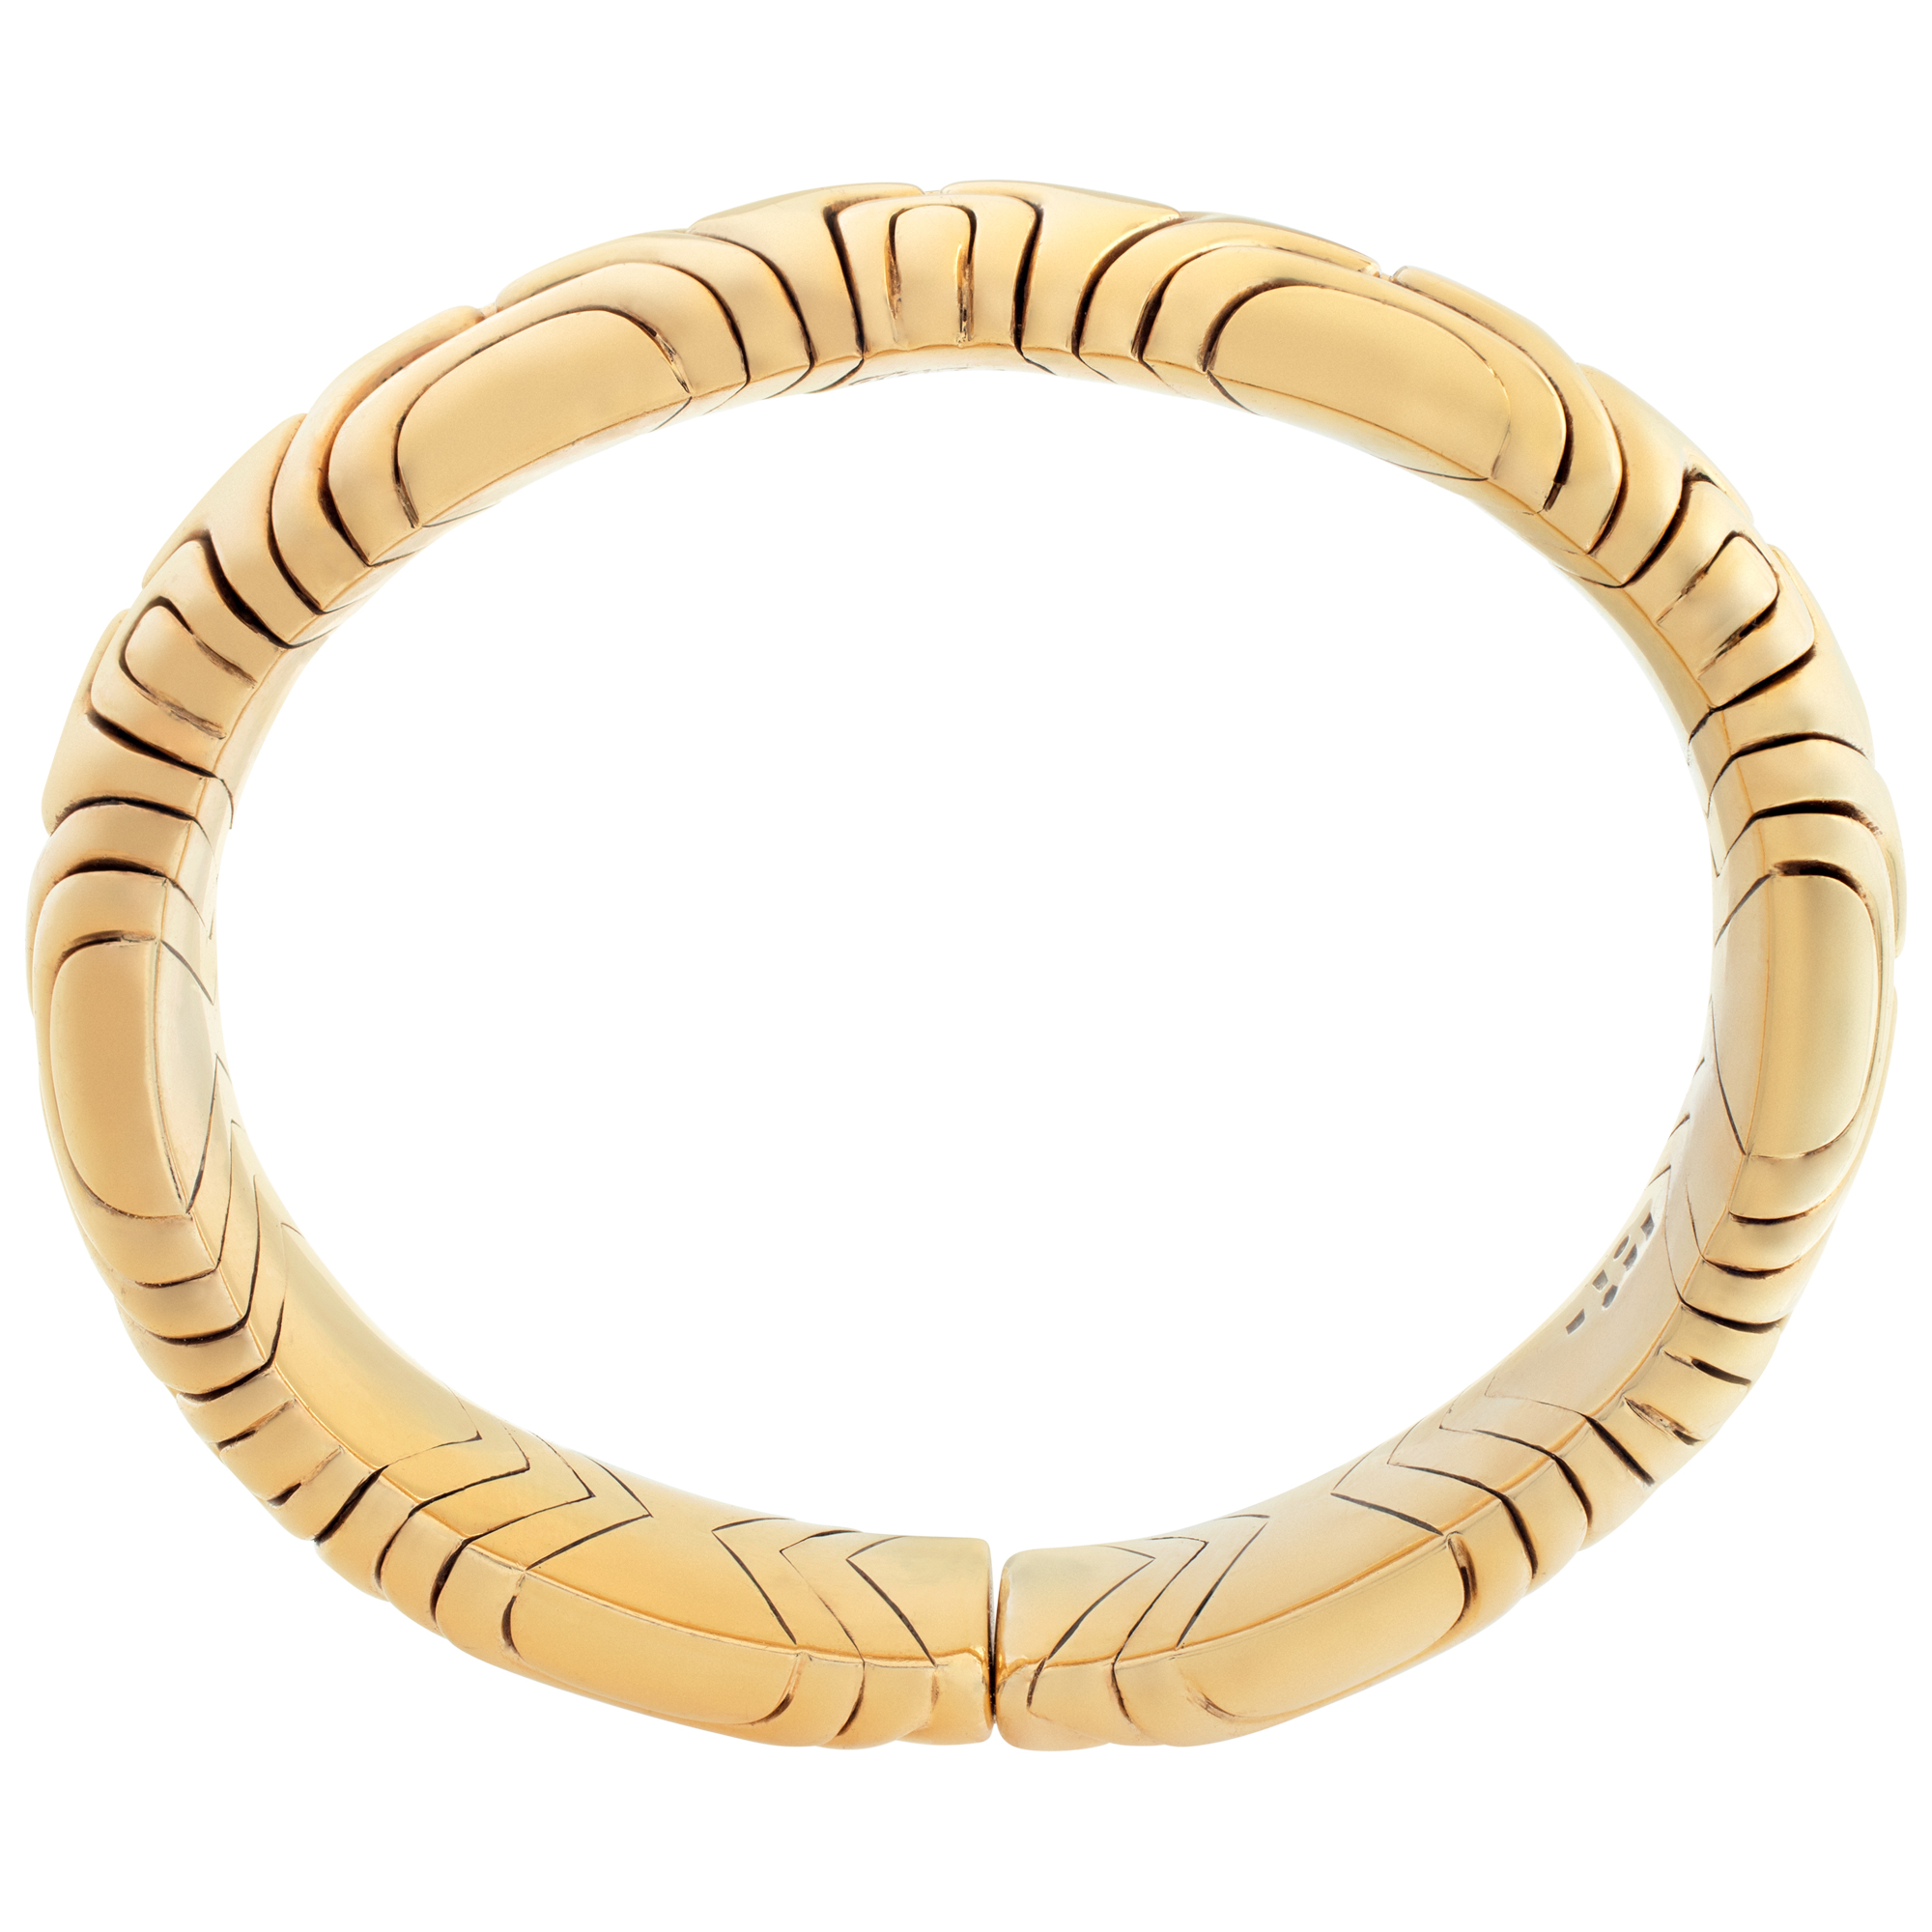 Vintage Bvlgari Alveare bracelet cuff bangle in 18Kt yellow gold. Made in italy 1989 image 4